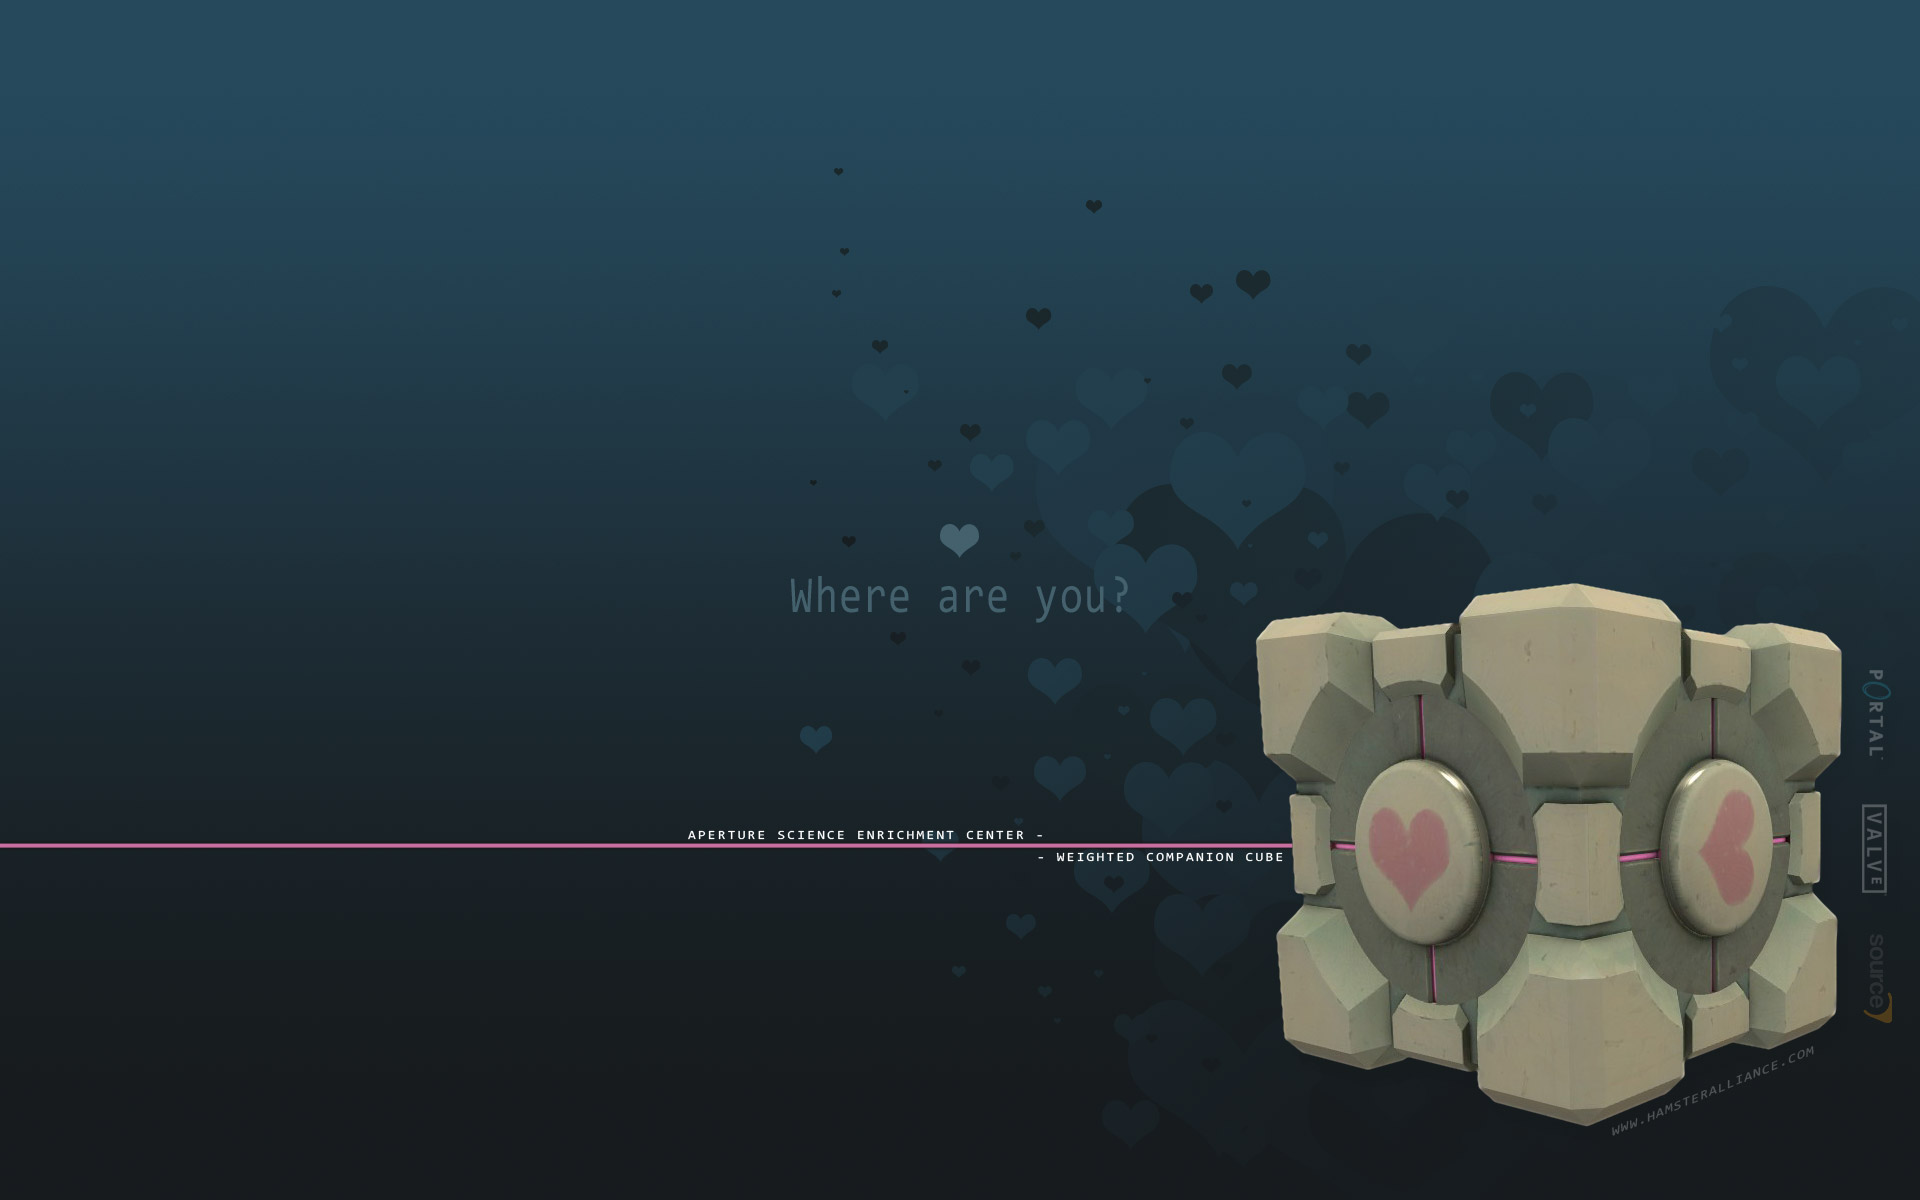 Weighted Companion Cube , HD Wallpaper & Backgrounds